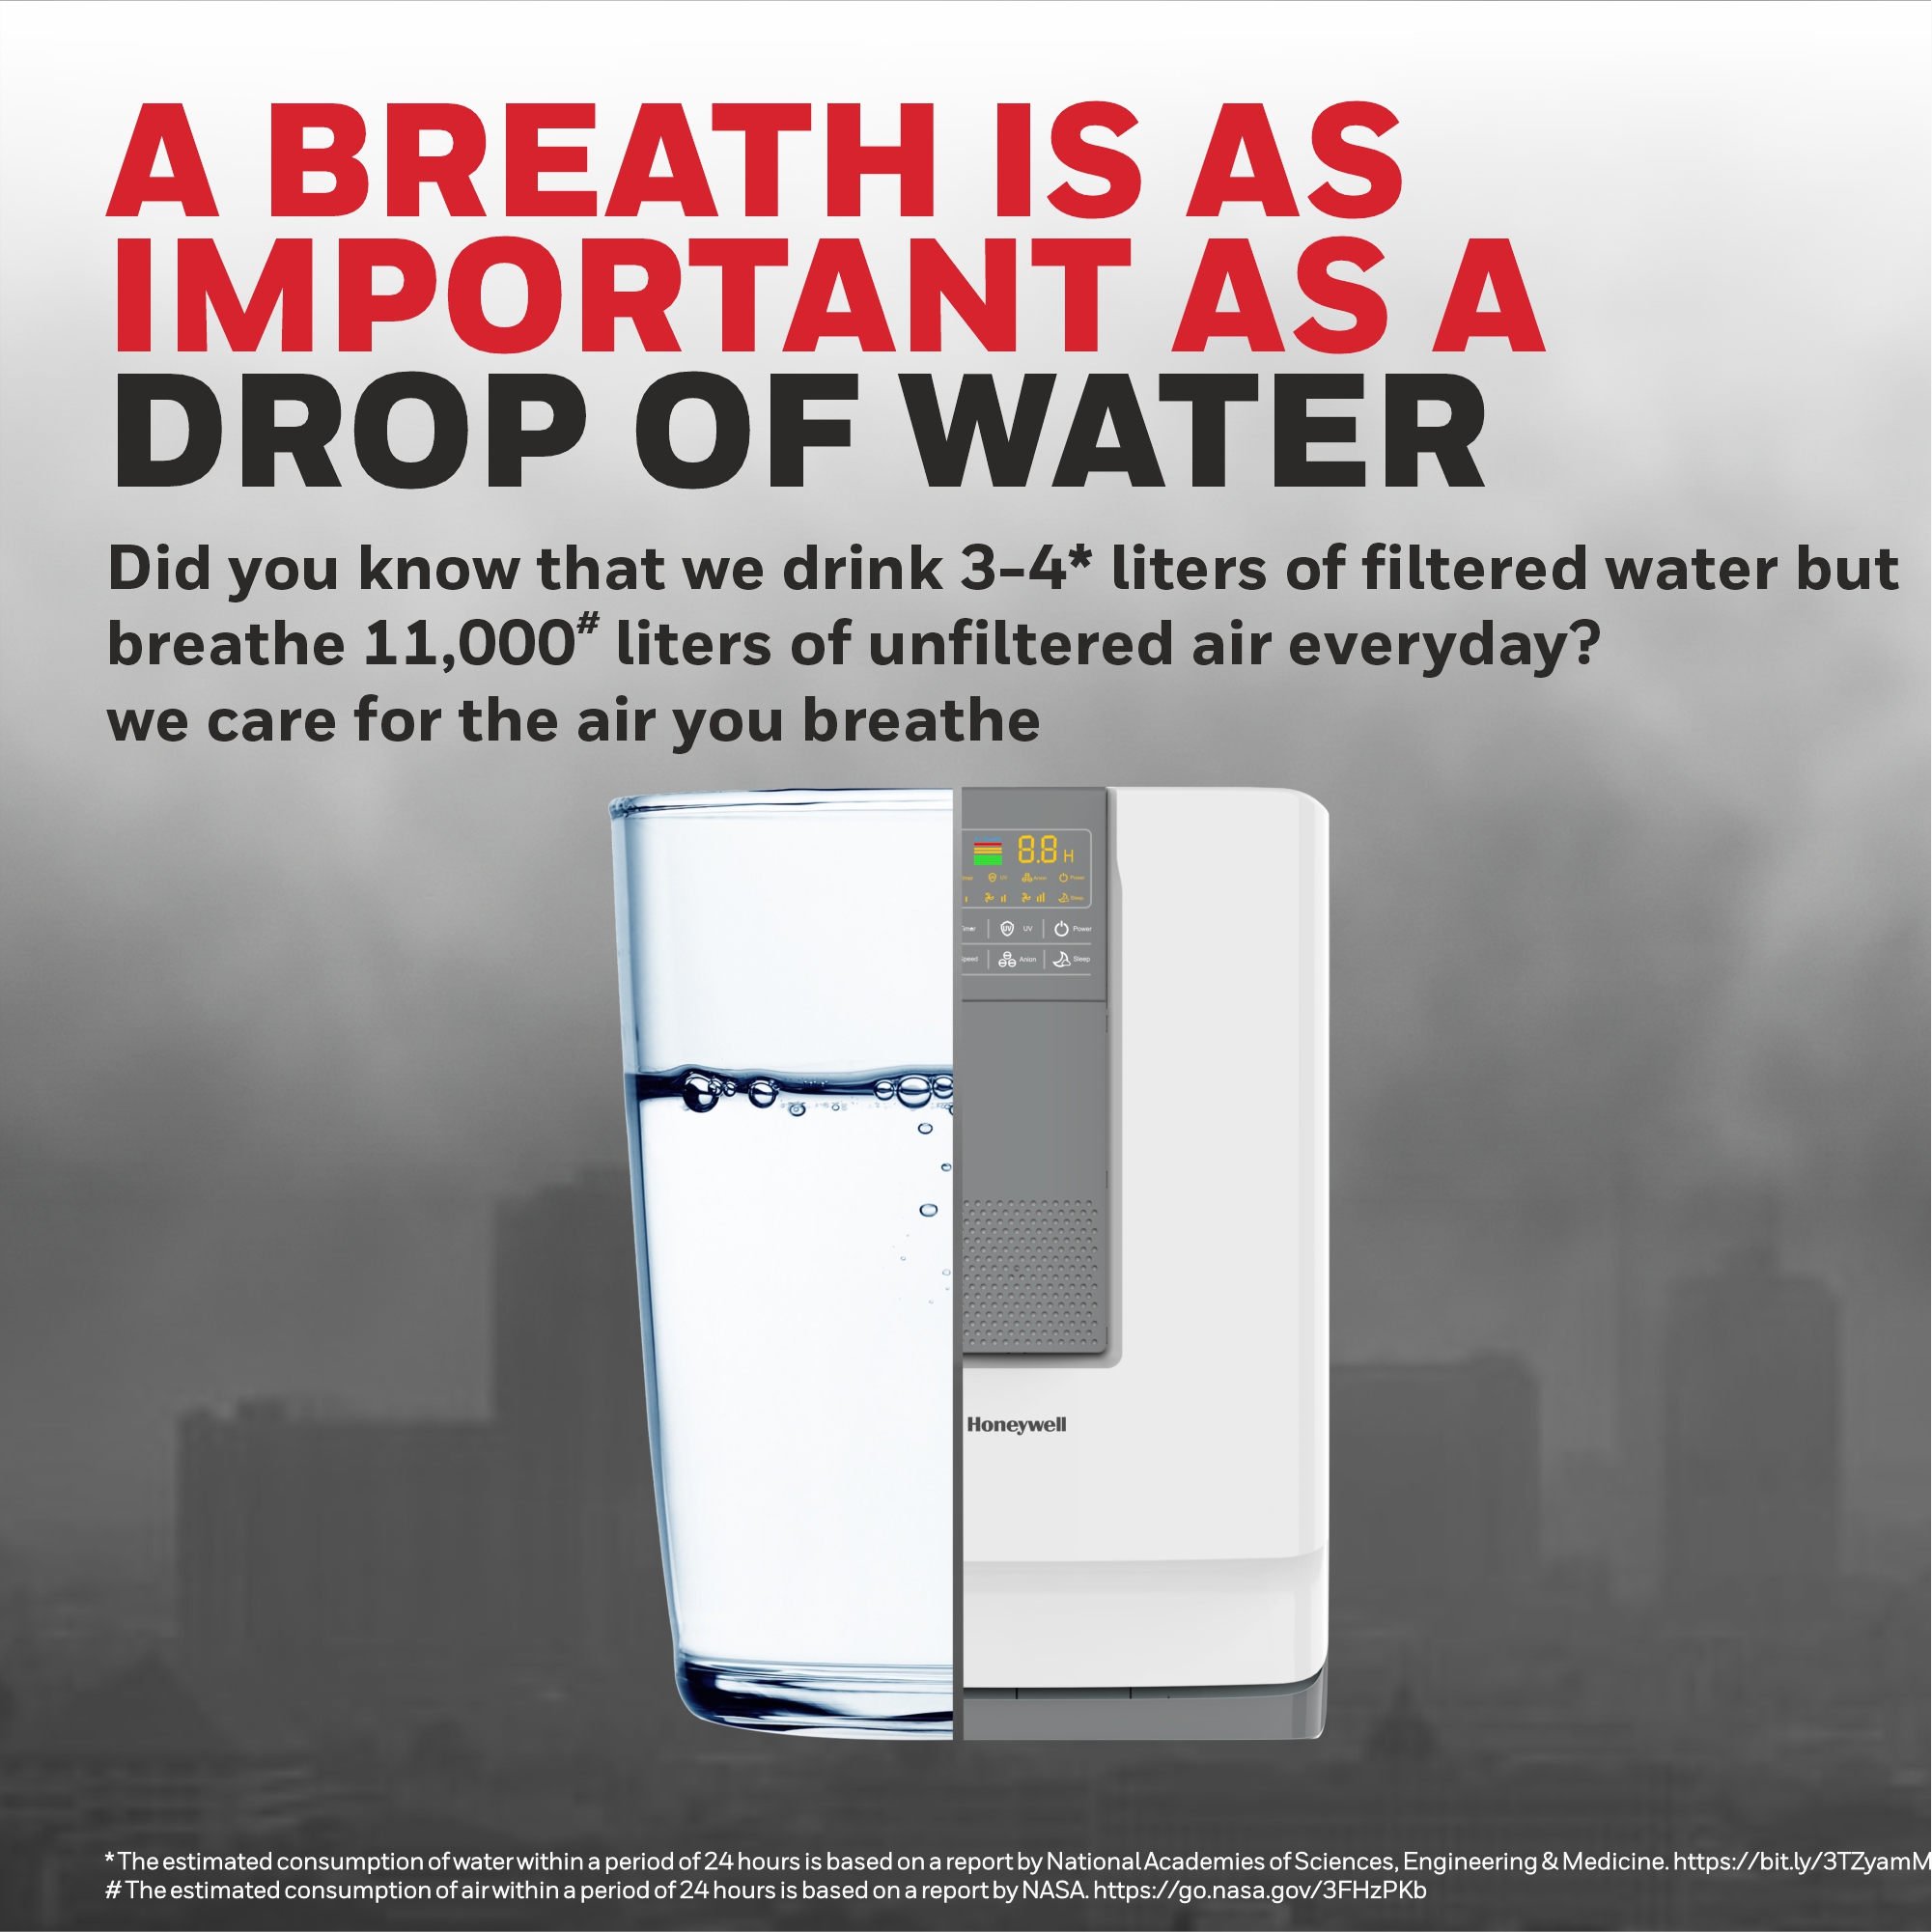 Honeywell Air Touch V4 Air Purifier, H13 HEPA Filter, UV LED & Ionizer Covers Upto 543 Sq.Ft / 50 Sq.Mtr